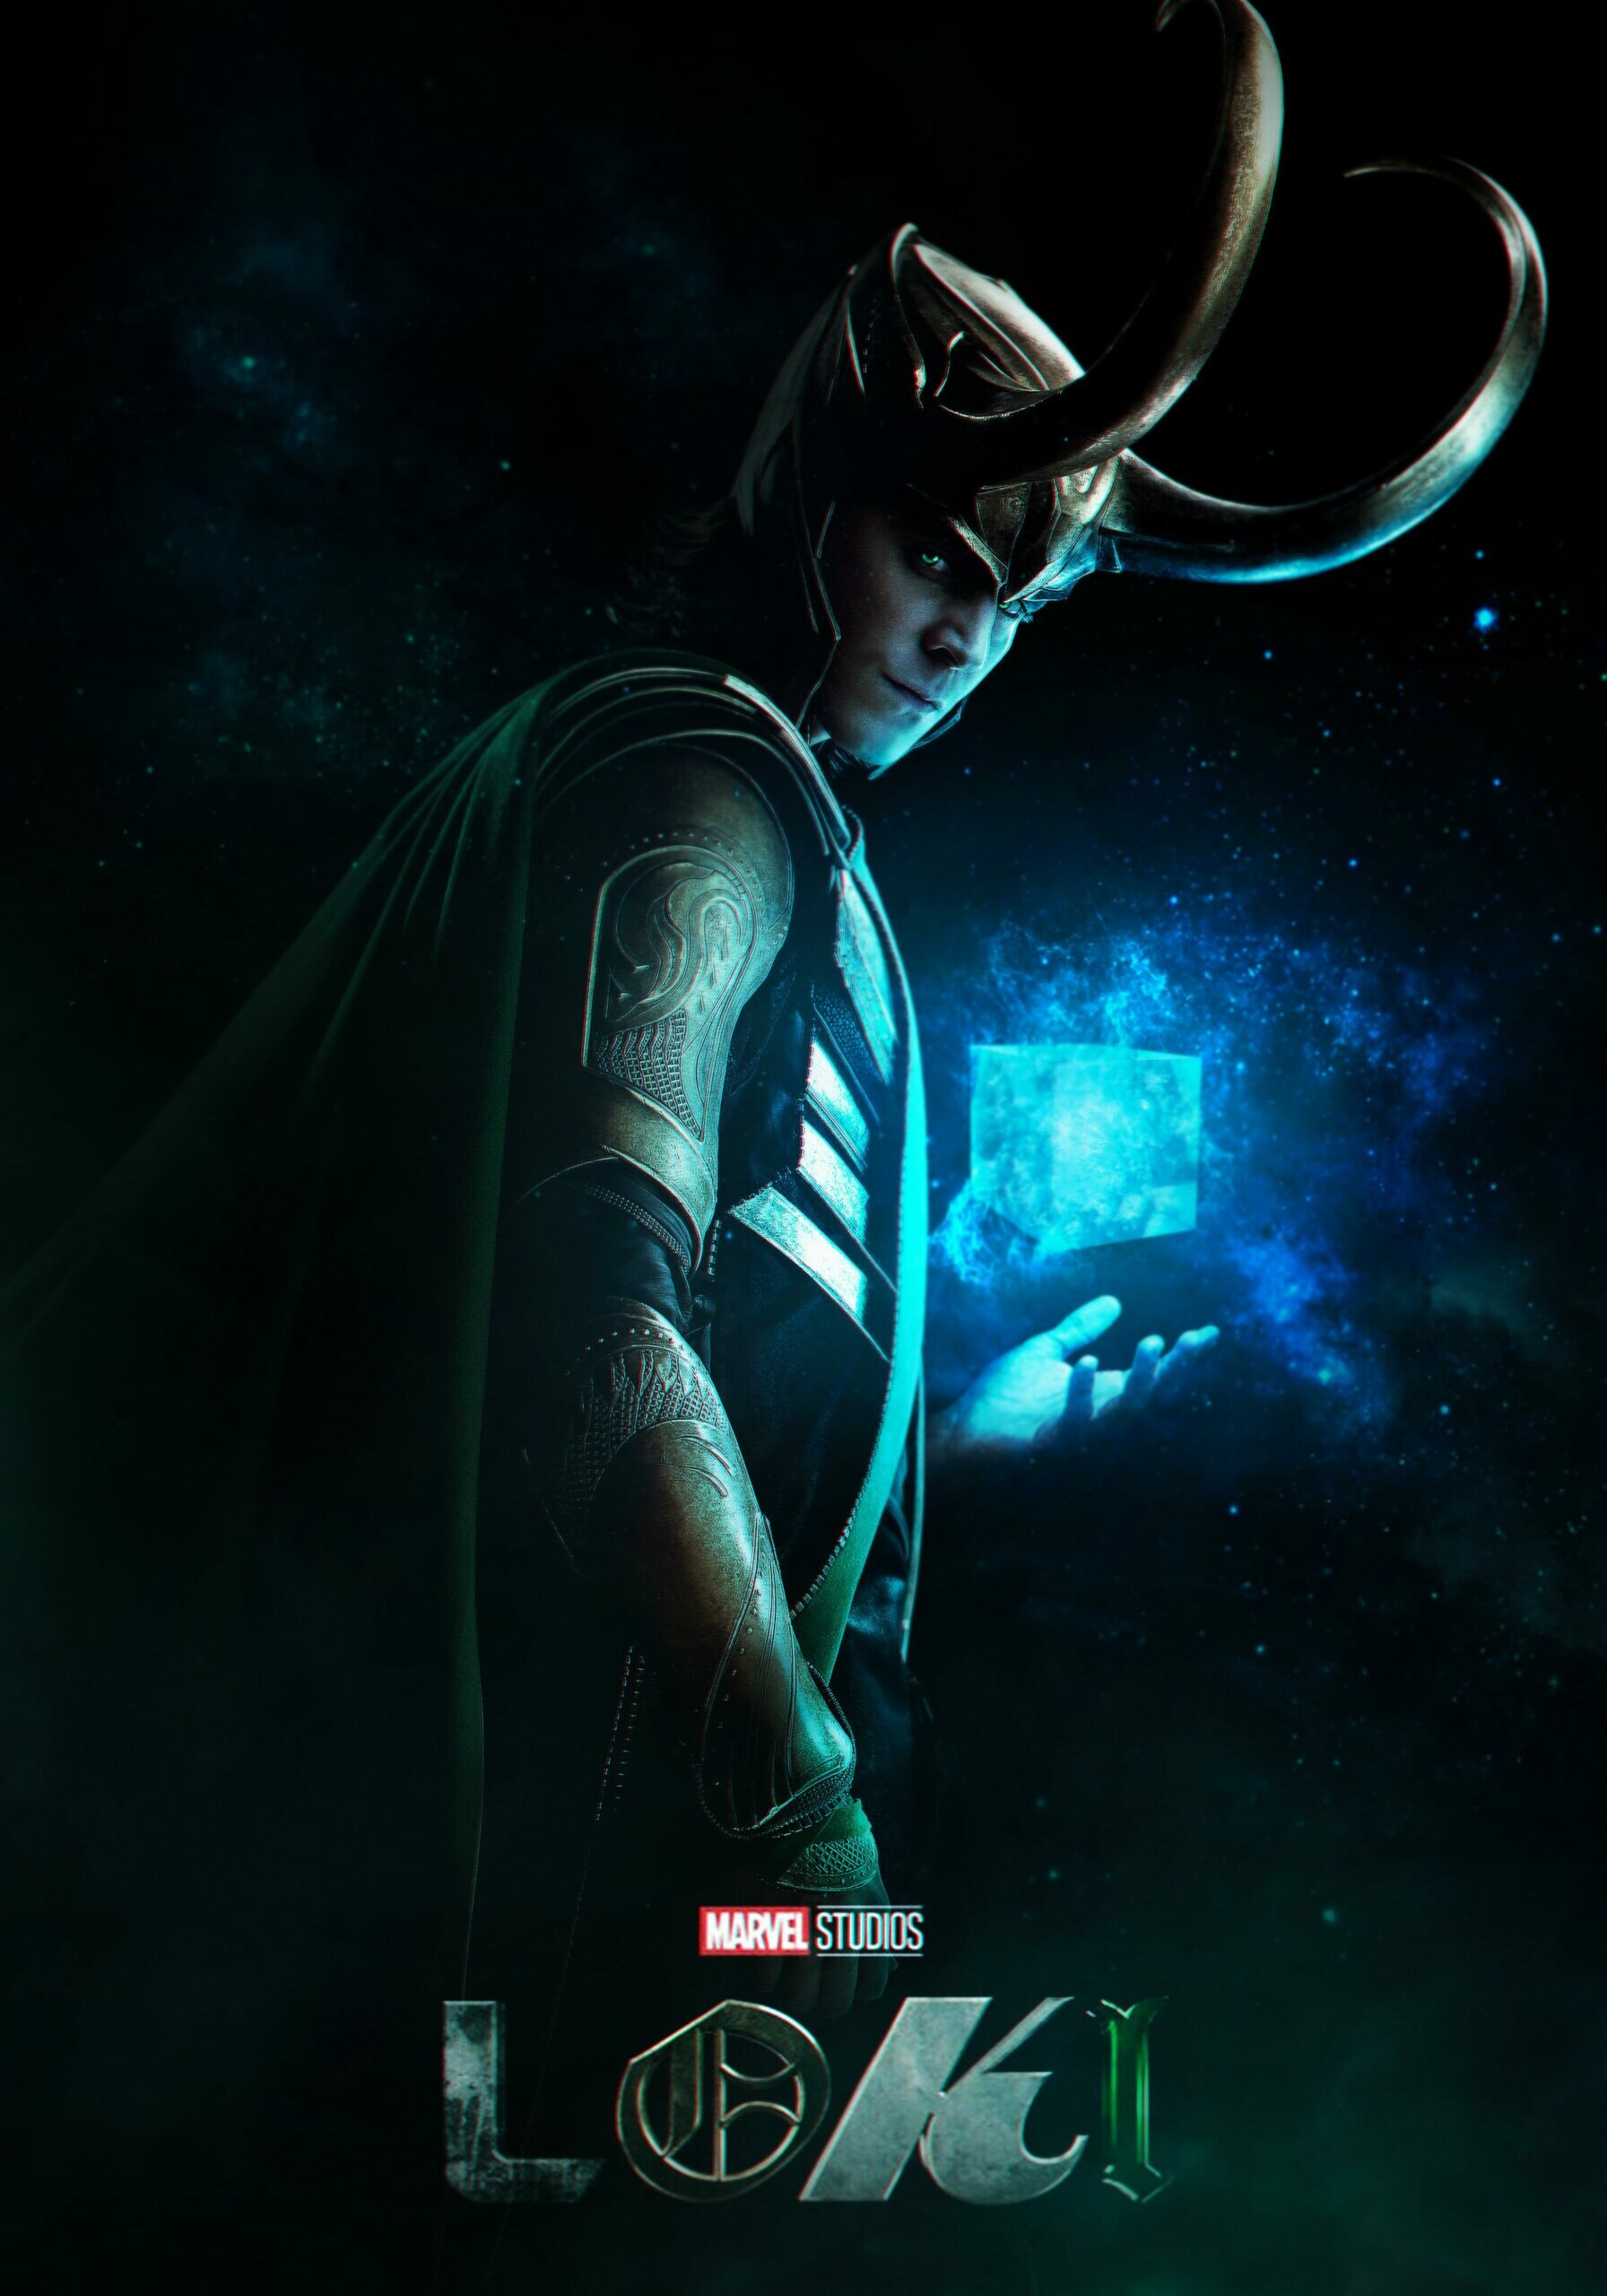 Loki: The series takes place after the events of the film Avengers: Endgame (2019). 1800x2560 HD Wallpaper.